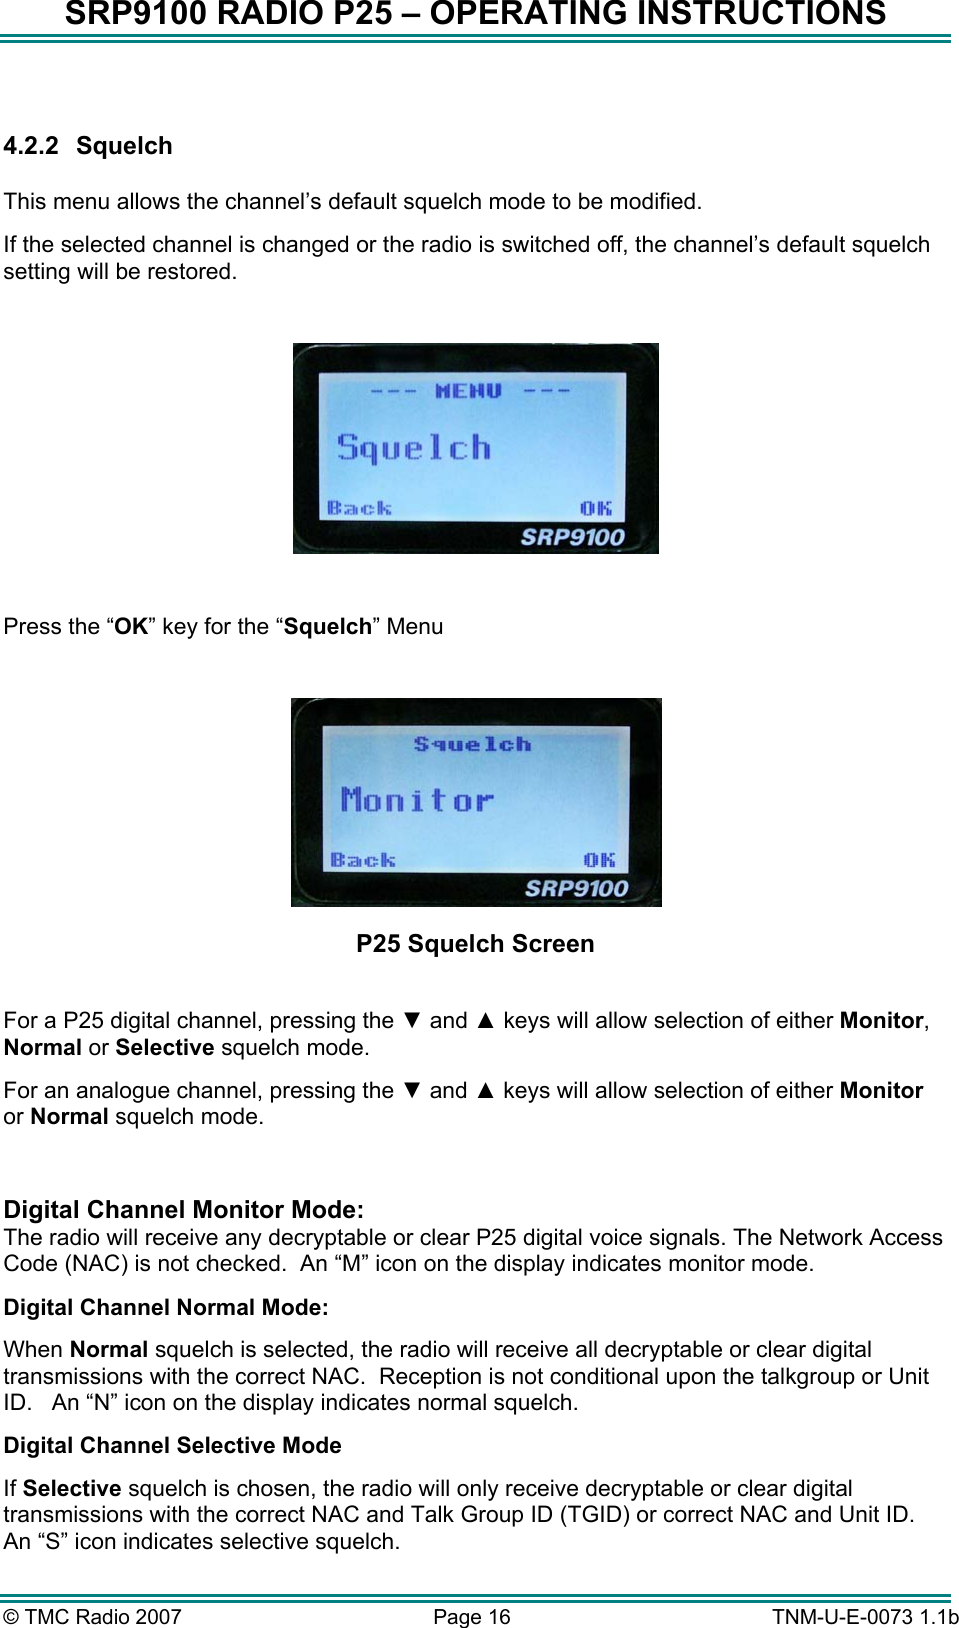 SRP9100 RADIO P25 – OPERATING INSTRUCTIONS  4.2.2 Squelch  This menu allows the channel’s default squelch mode to be modified. If the selected channel is changed or the radio is switched off, the channel’s default squelch setting will be restored.    Press the “OK” key for the “Squelch” Menu   P25 Squelch Screen  For a P25 digital channel, pressing the ▼ and ▲ keys will allow selection of either Monitor, Normal or Selective squelch mode.   For an analogue channel, pressing the ▼ and ▲ keys will allow selection of either Monitor or Normal squelch mode.    Digital Channel Monitor Mode:   The radio will receive any decryptable or clear P25 digital voice signals. The Network Access Code (NAC) is not checked.  An “M” icon on the display indicates monitor mode. Digital Channel Normal Mode: When Normal squelch is selected, the radio will receive all decryptable or clear digital transmissions with the correct NAC.  Reception is not conditional upon the talkgroup or Unit ID.   An “N” icon on the display indicates normal squelch. Digital Channel Selective Mode If Selective squelch is chosen, the radio will only receive decryptable or clear digital transmissions with the correct NAC and Talk Group ID (TGID) or correct NAC and Unit ID.   An “S” icon indicates selective squelch. © TMC Radio 2007  Page 16   TNM-U-E-0073 1.1b 